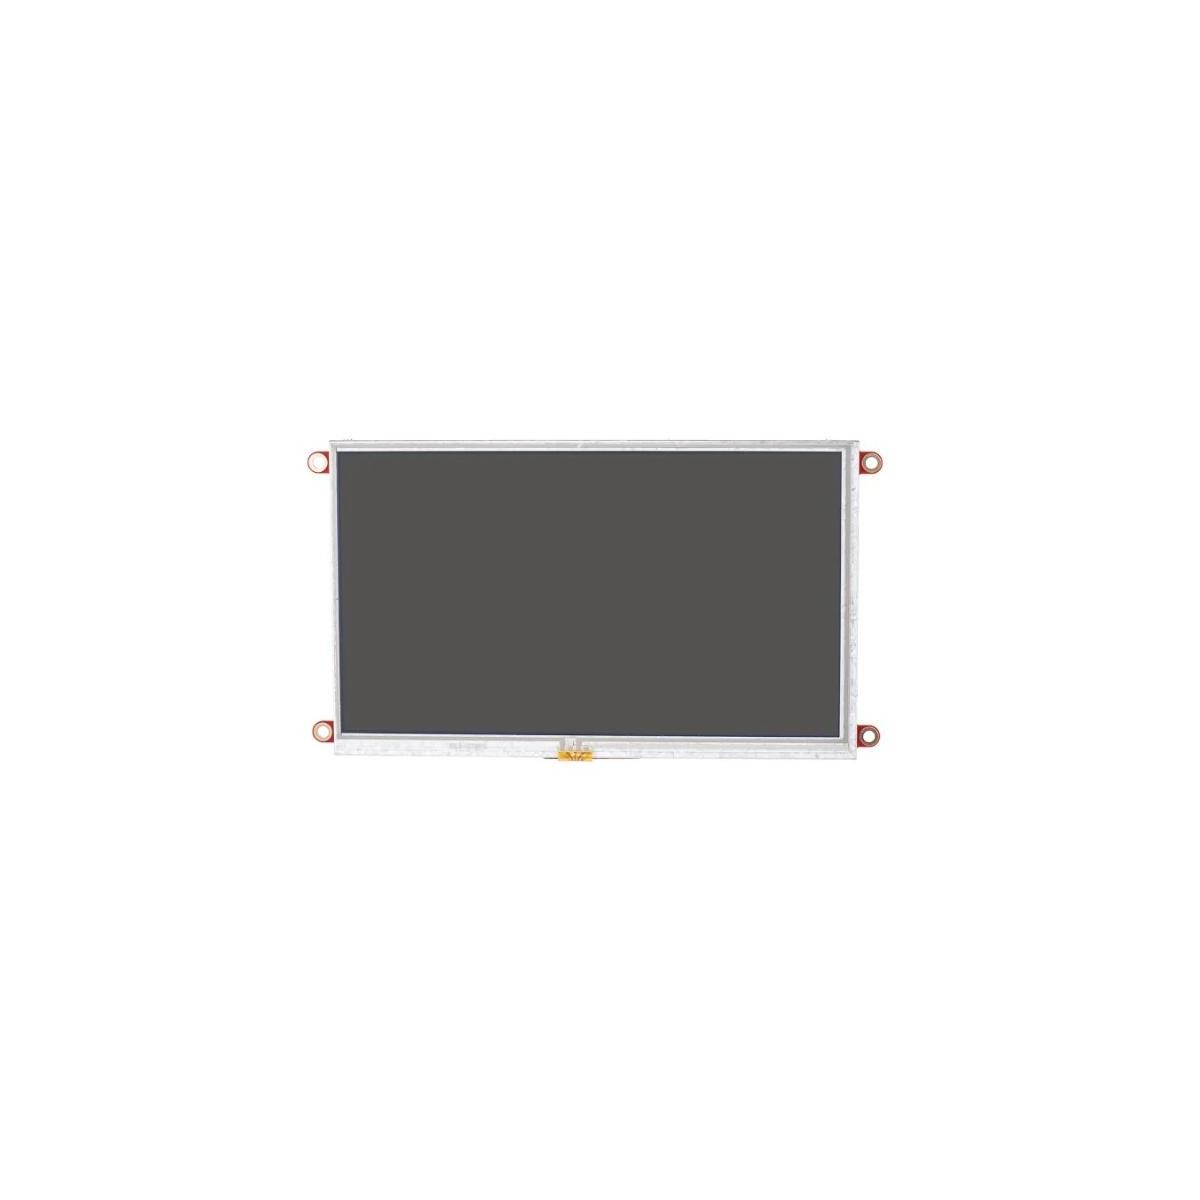 Display 841-7835 SYSTEMS 4D